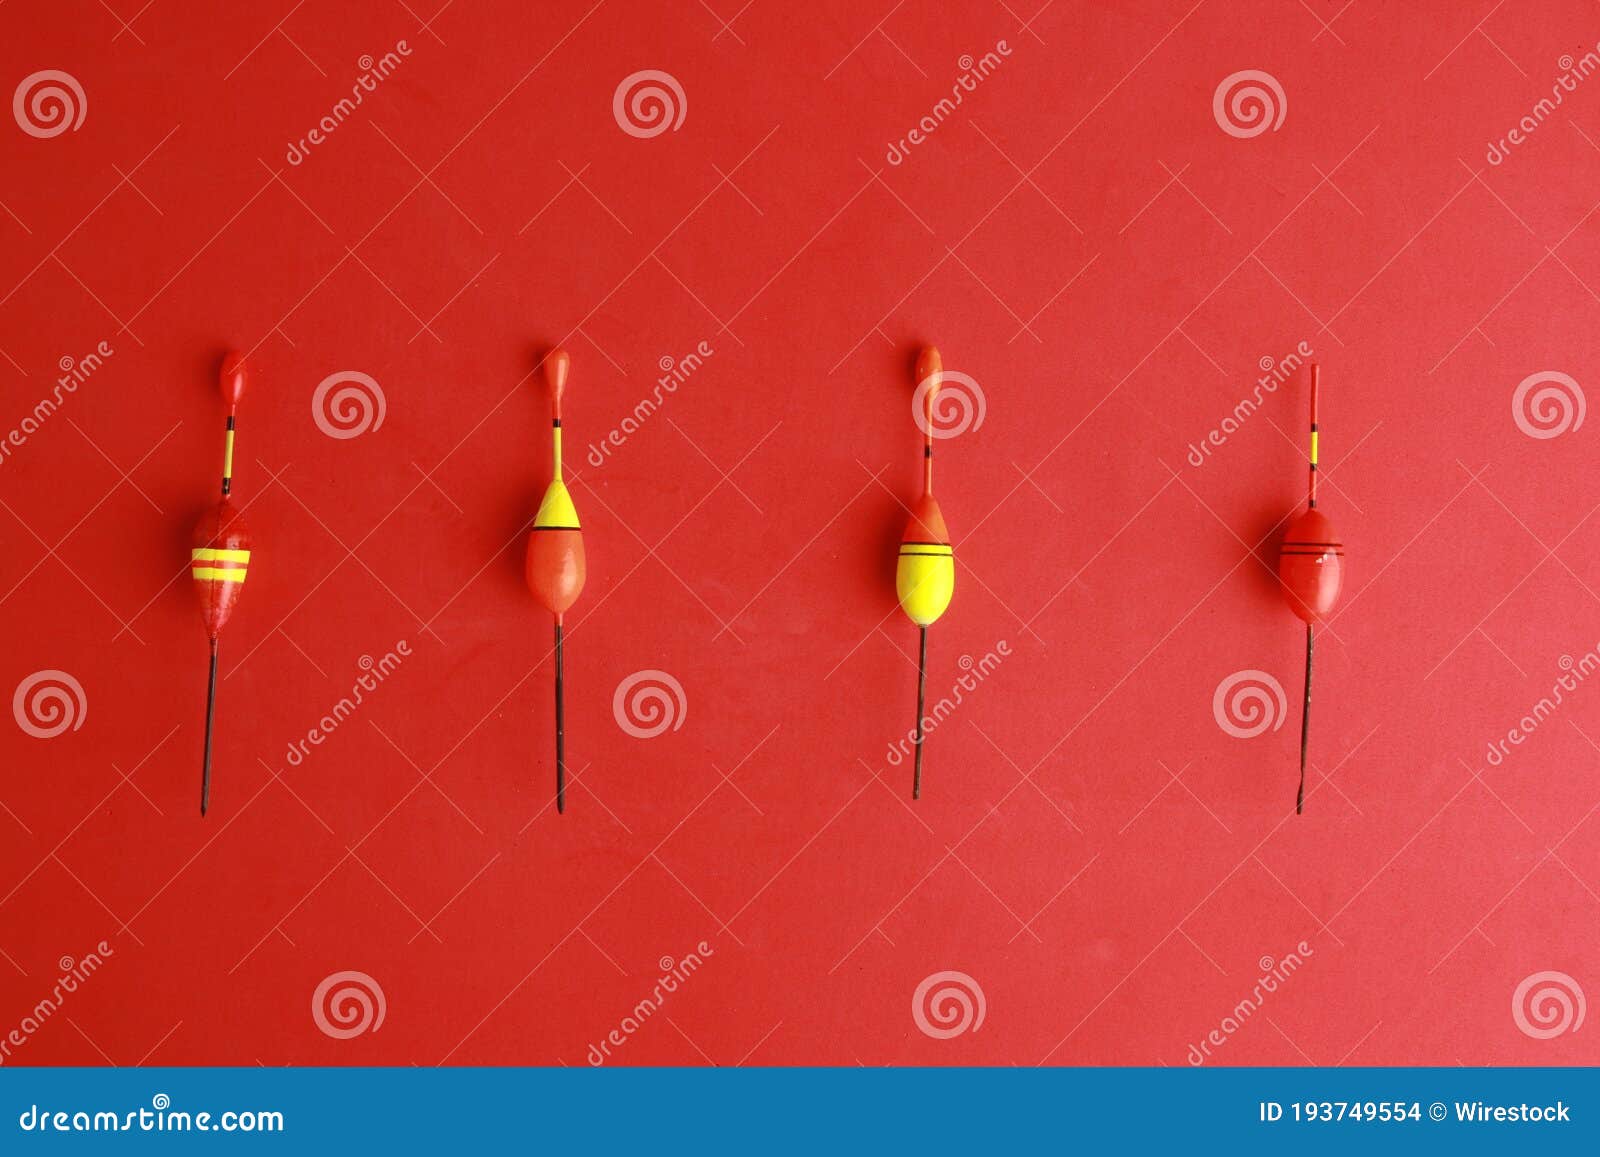 Top View of Colorful Fishing Rod Bobbers on a Red Background Stock Photo -  Image of lifestyle, tackle: 193749554